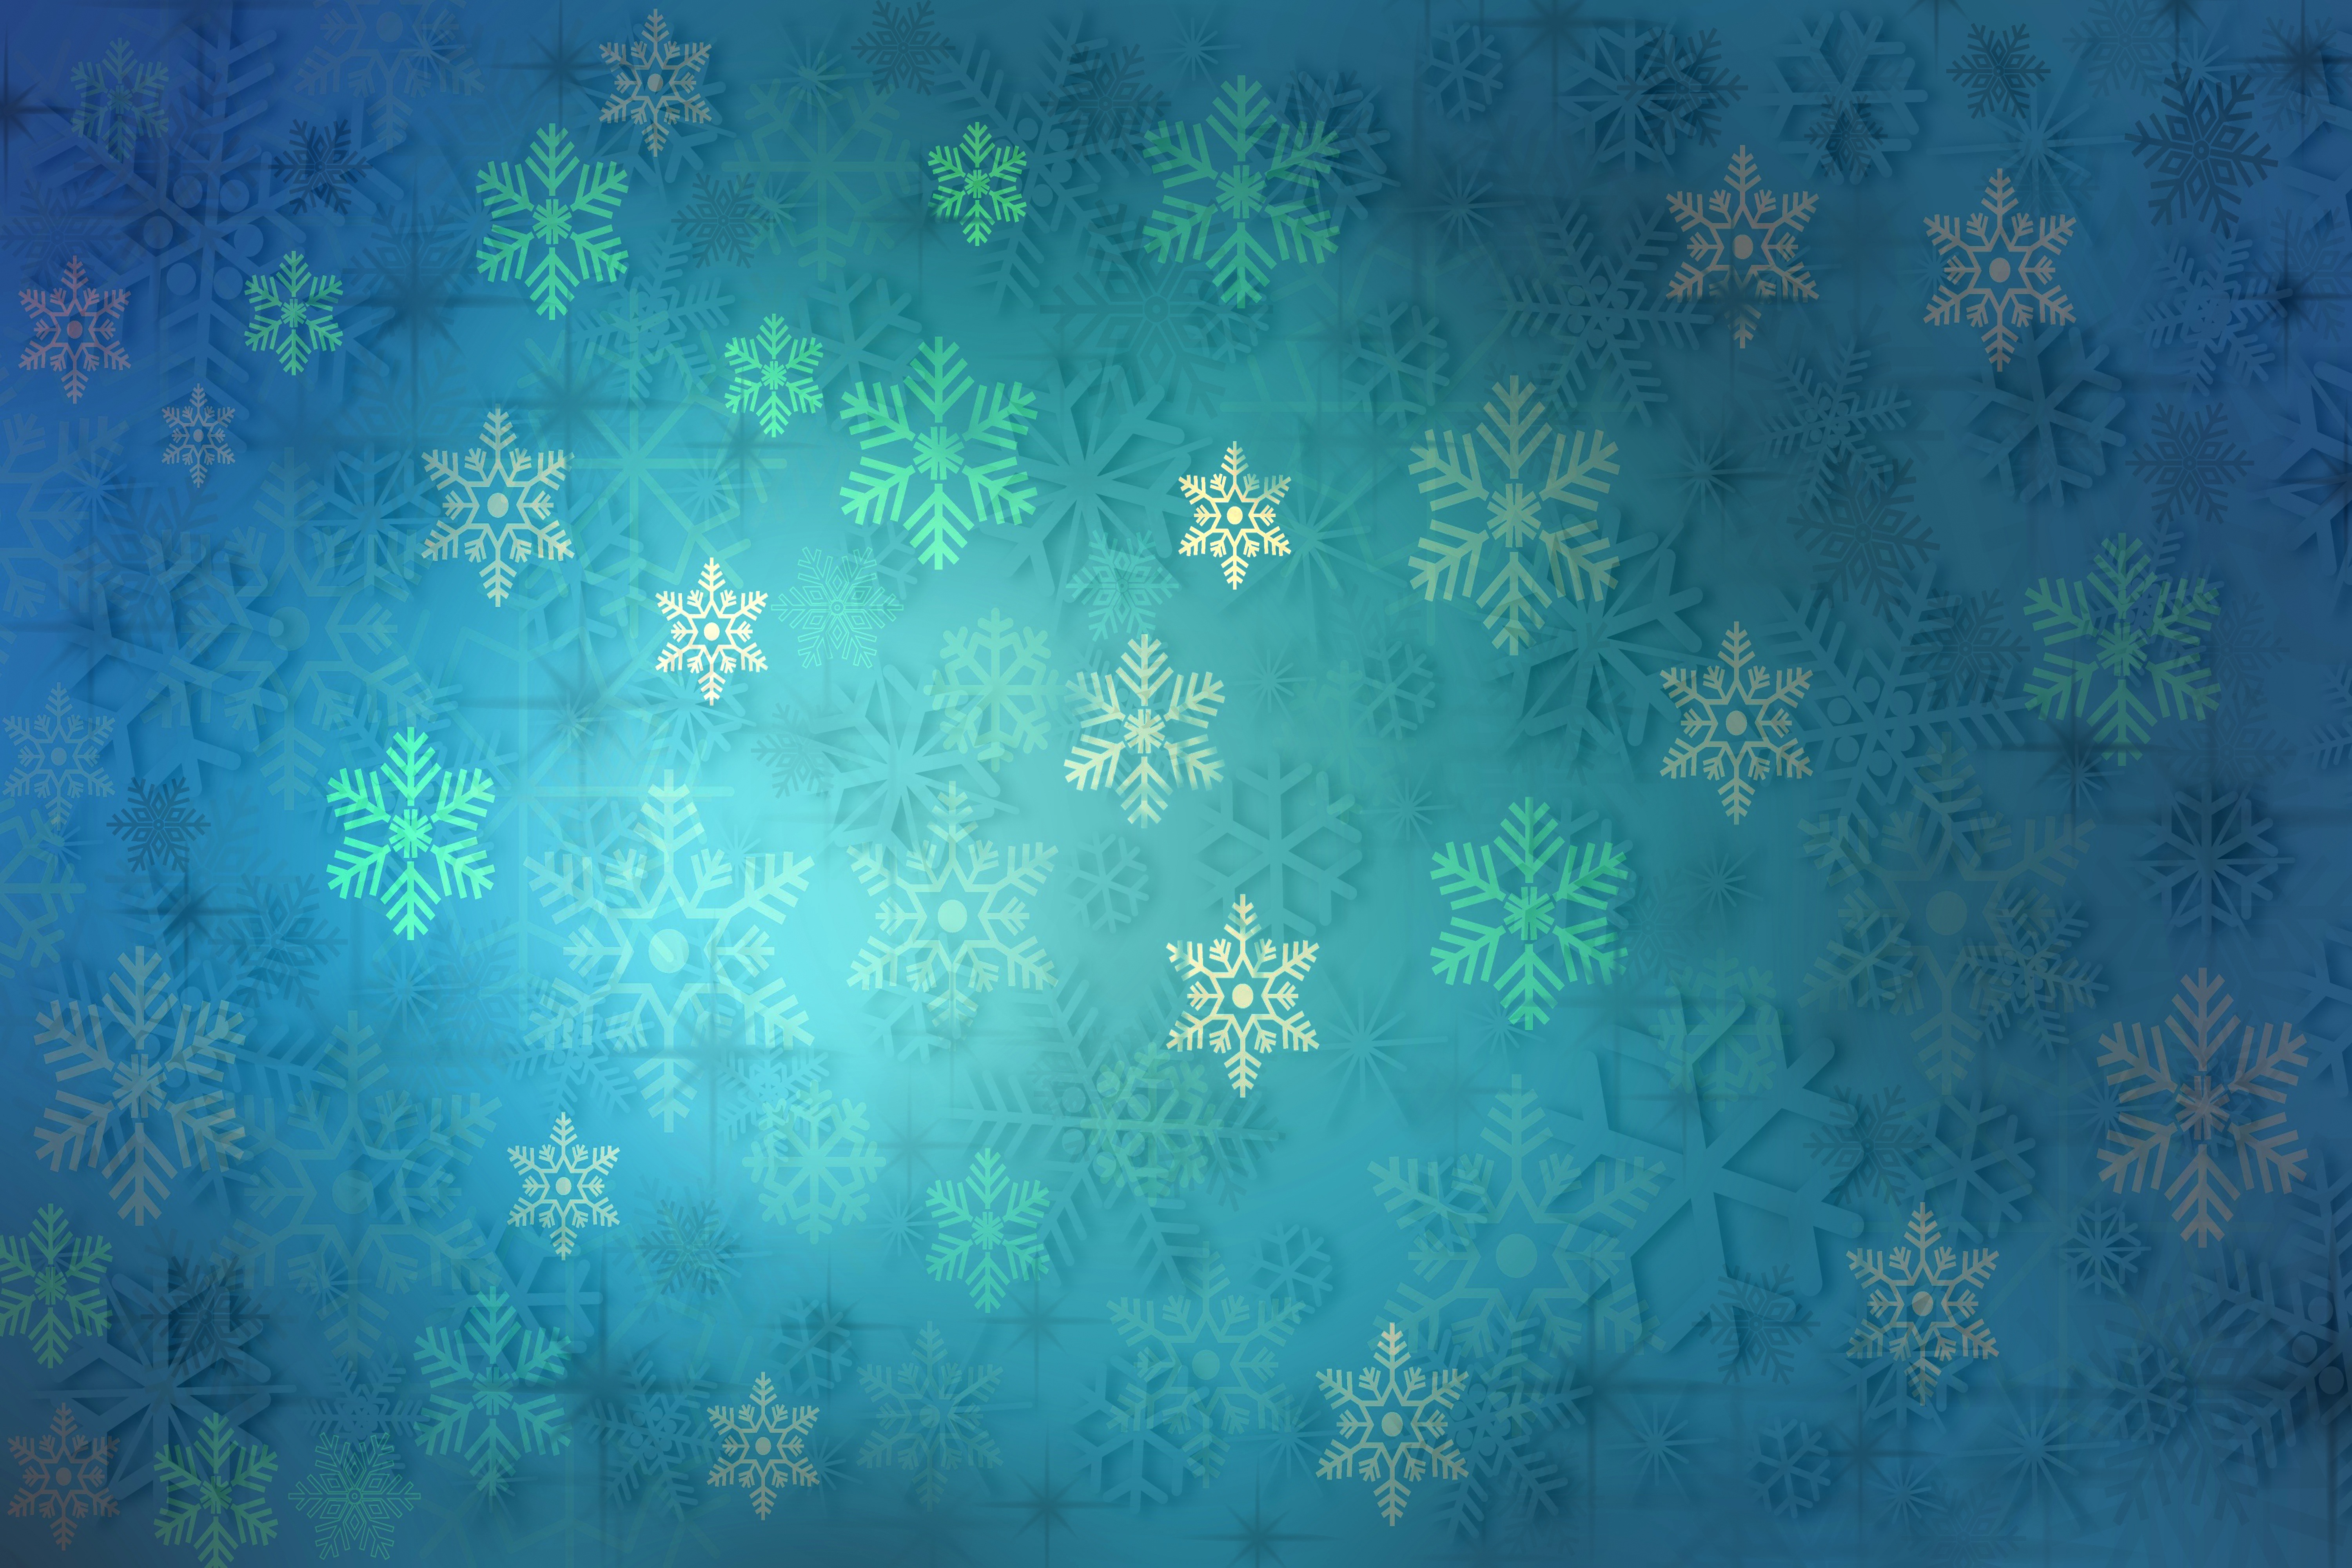 texture, pattern, snowflakes, new year, textures, christmas, blue, holiday UHD